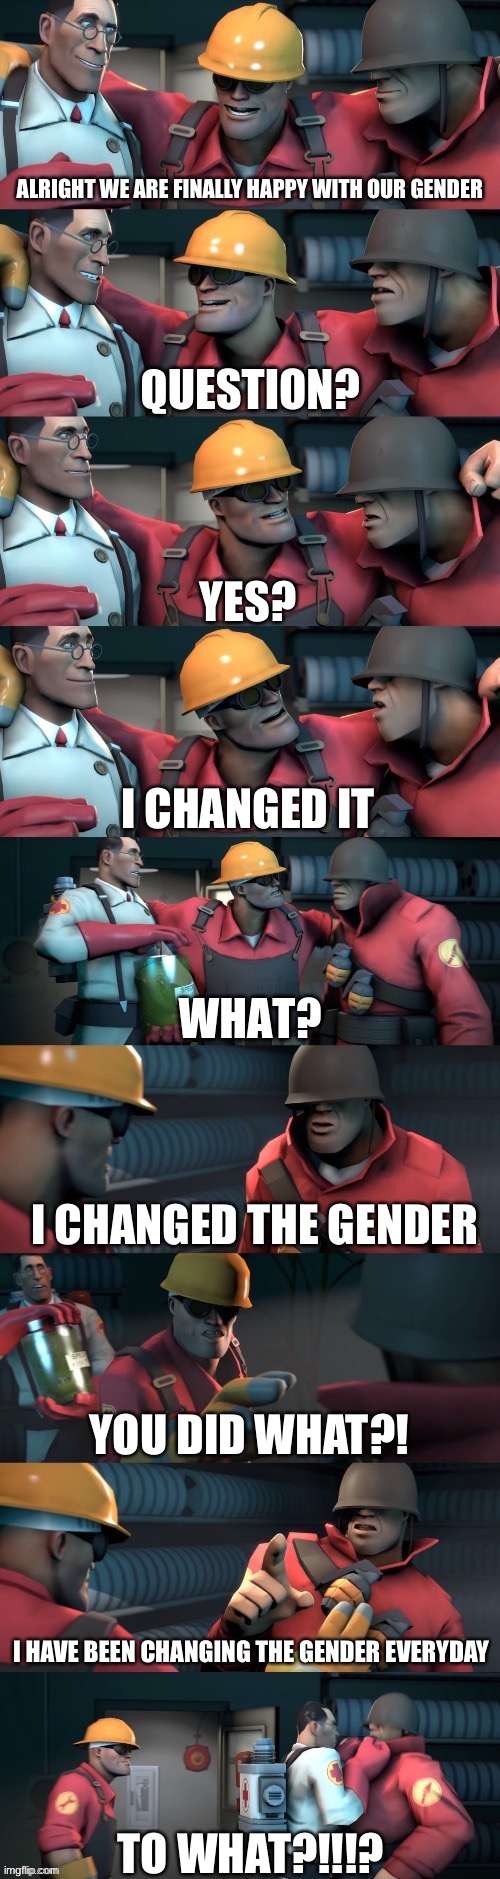 TF2 teleport bread meme English | ALRIGHT WE ARE FINALLY HAPPY WITH OUR GENDER; YES? I CHANGED IT; I CHANGED THE GENDER; YOU DID WHAT?! I HAVE BEEN CHANGING THE GENDER EVERYDAY; TO WHAT?!!!? | image tagged in tf2 teleport bread meme english,lgbtq,lgbt,gender | made w/ Imgflip meme maker